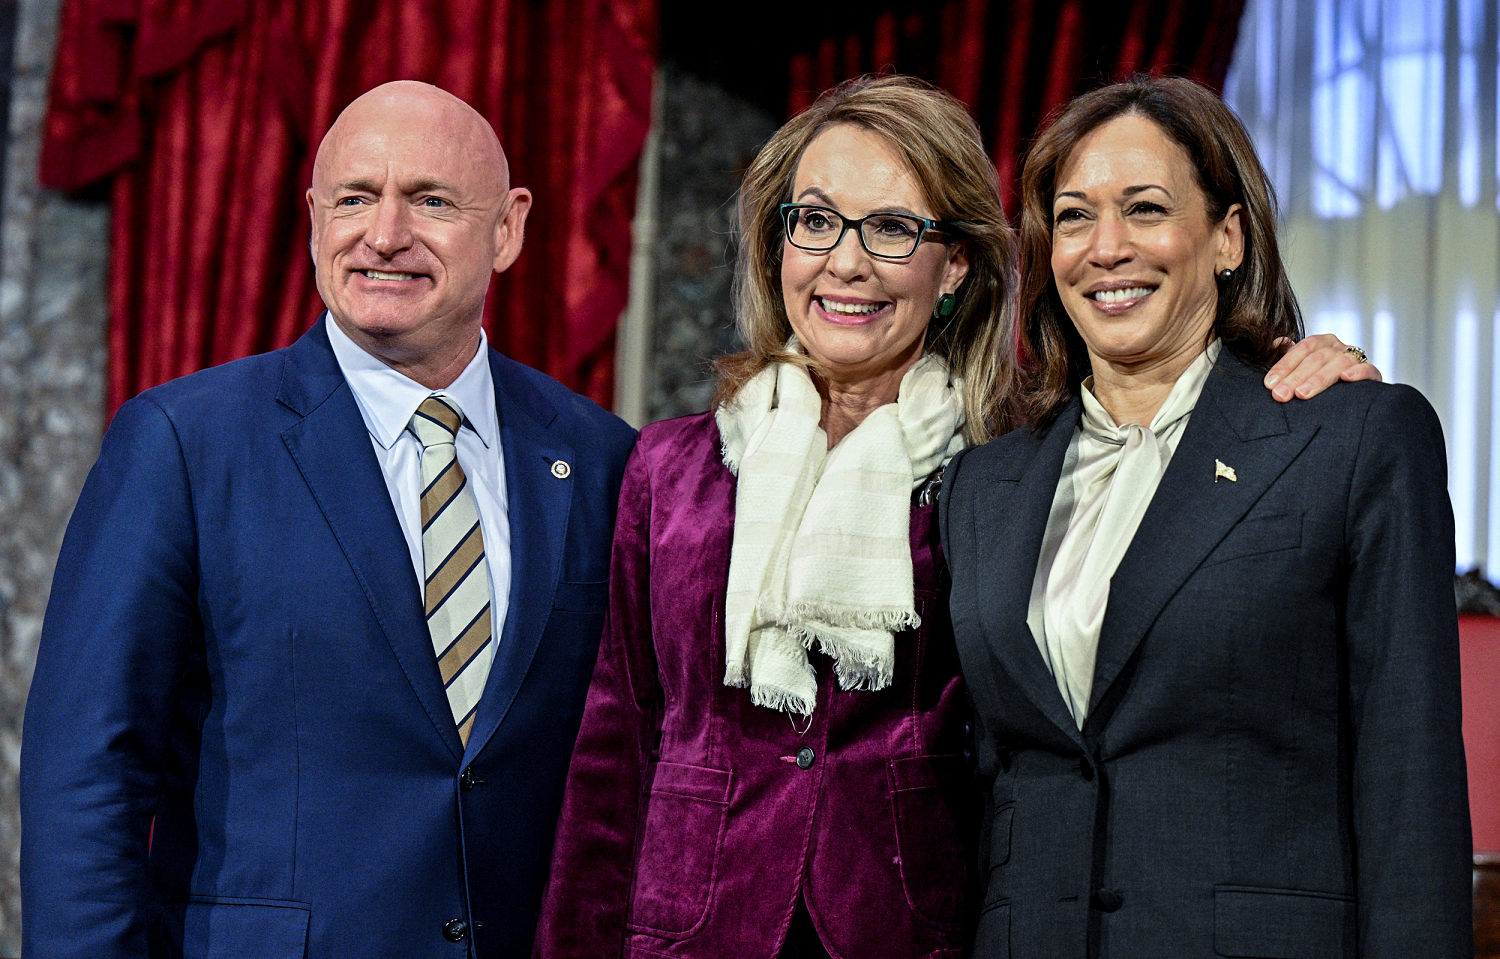 Chuck Todd: How Harris can use her VP search to define herself